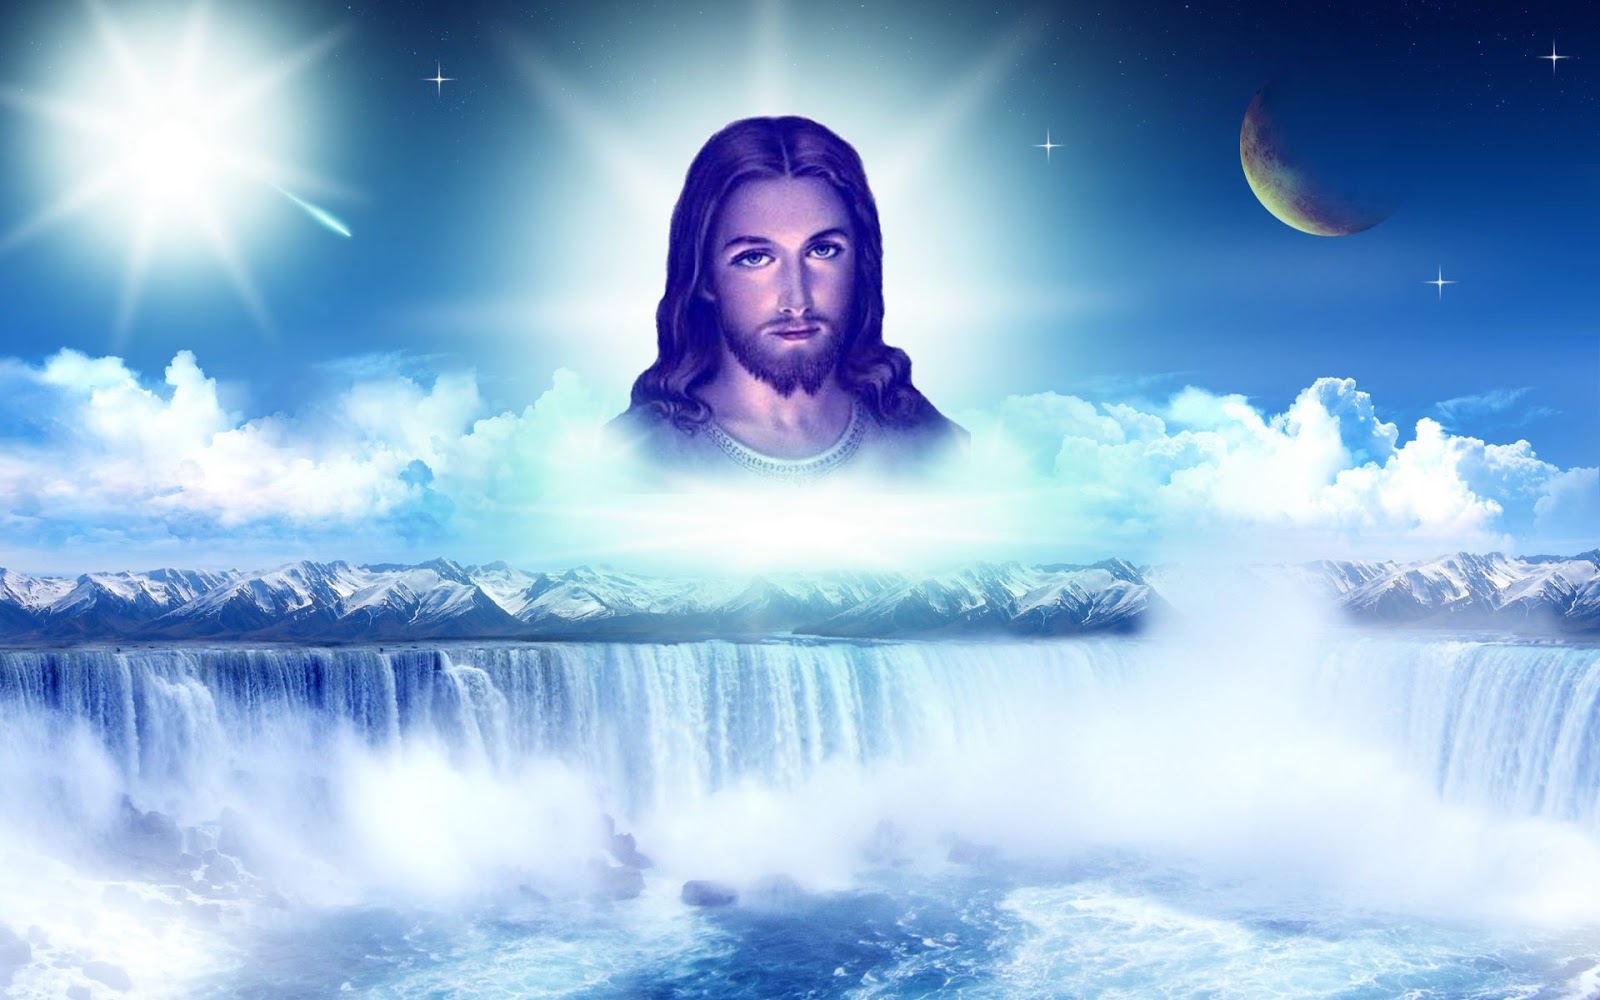 “Stunning Collection of 4K Jesus Images in HD 3D Available for Free Download – Over 999 Options!”